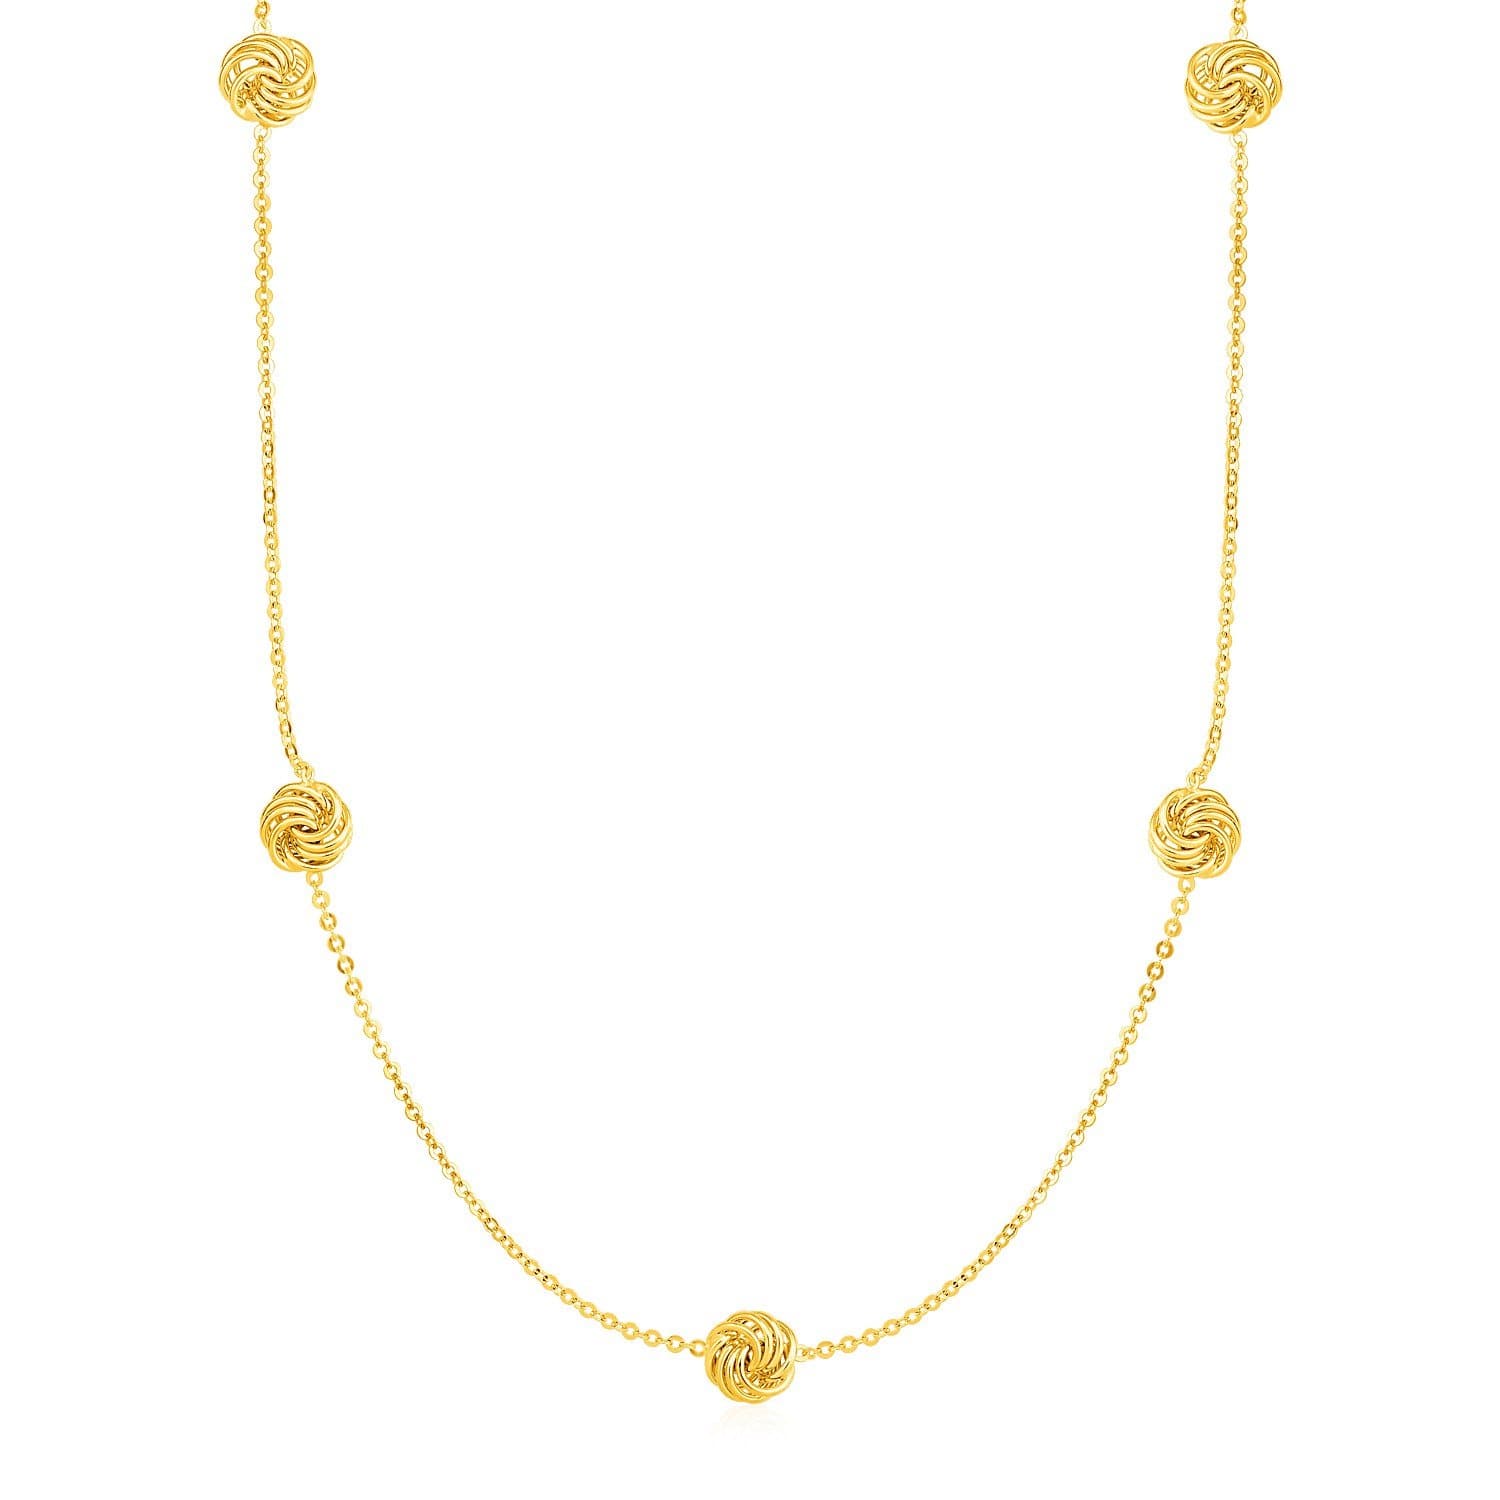 Station Necklace with Polished Love Knots in 14k Yellow Gold – IceTrends